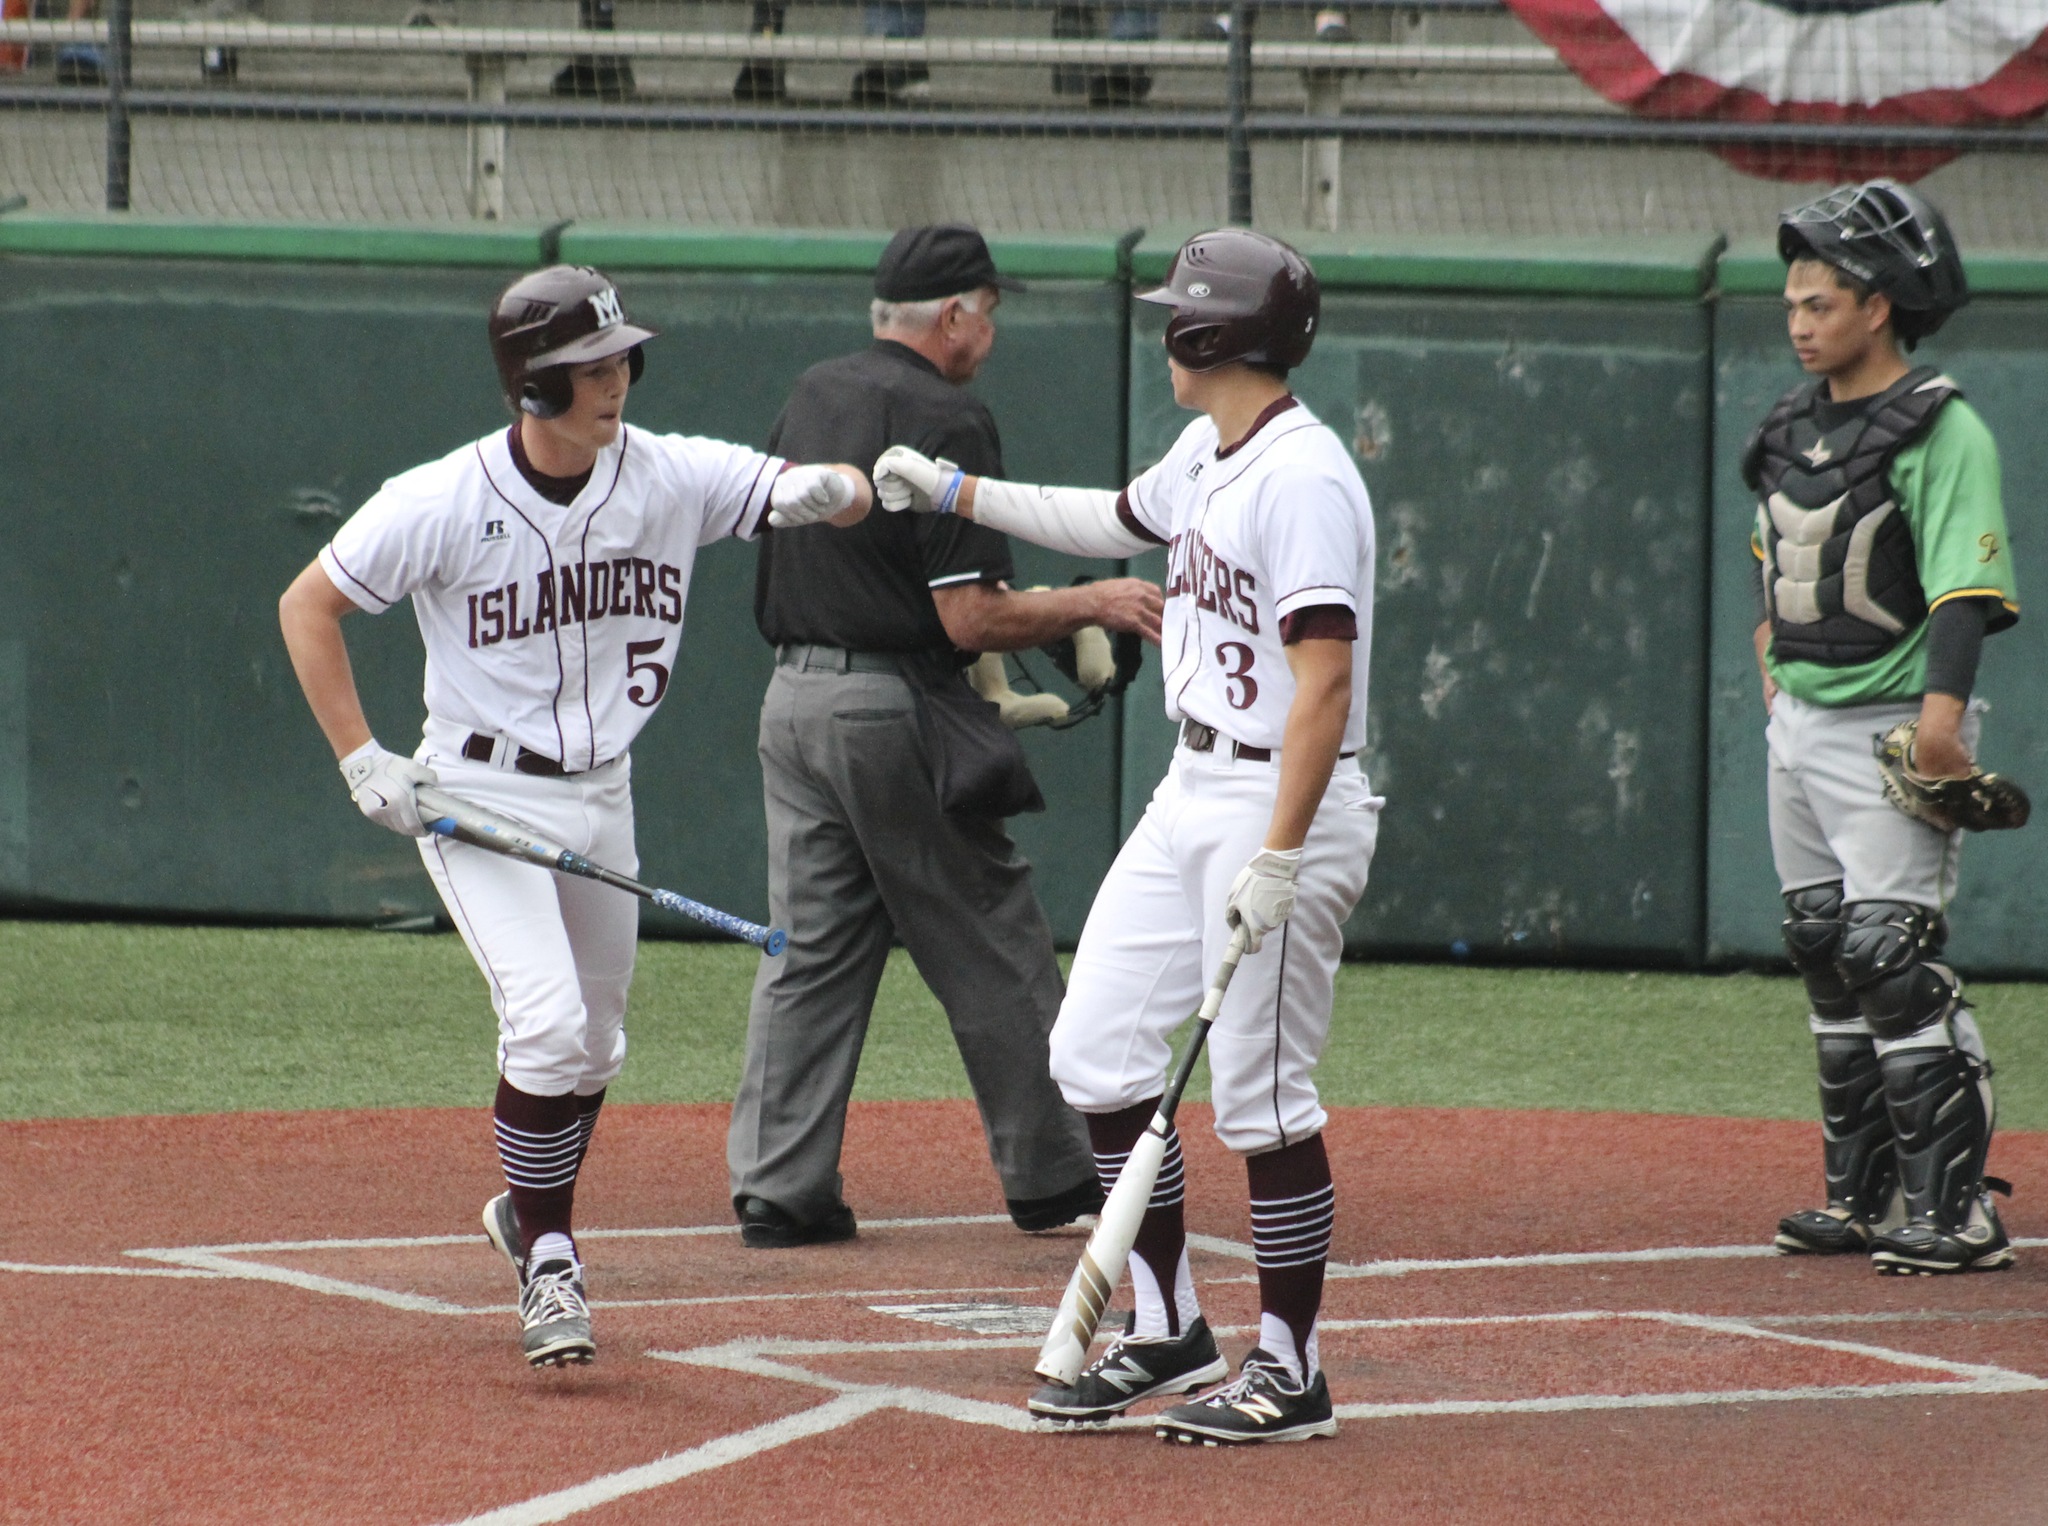 Mercer Island’s Josh Stenberg (5) is greeted by Anthony Scalzo (3) after hitting a solo home run against Roosevelt Saturday at Steve Cox Memorial Park in Seattle. The Islanders beat the Rough Riders 3-1 to advance to the 3A state regionals (Joe Livarchik/staff photo).